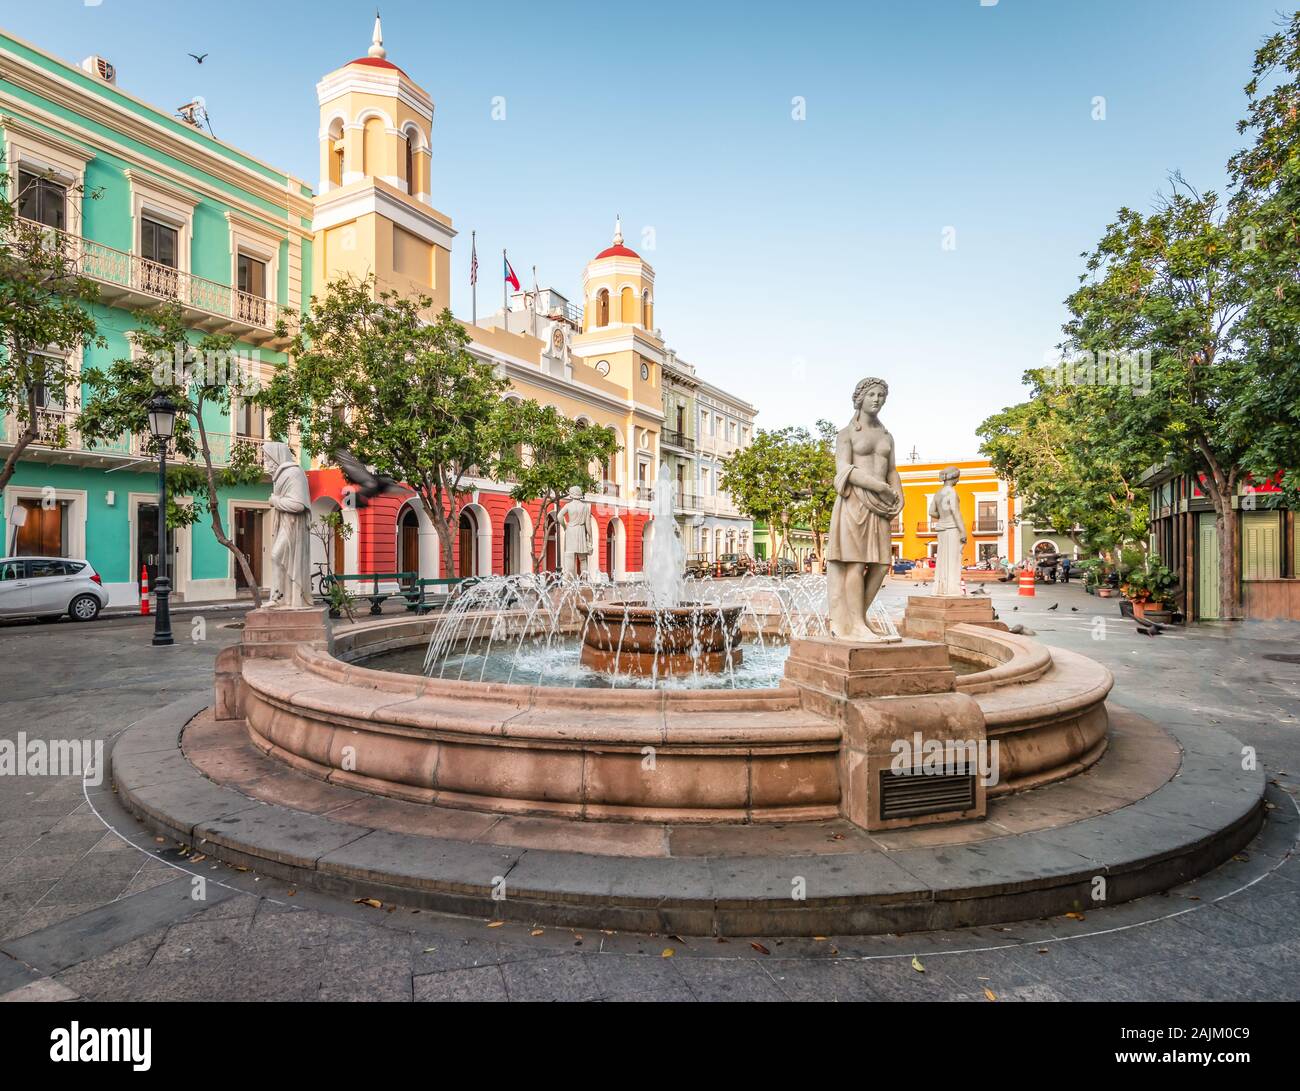 Plaza de Armas, town square with fountain in the city centre of Old San Juan, Puerto Rico. Stock Photo